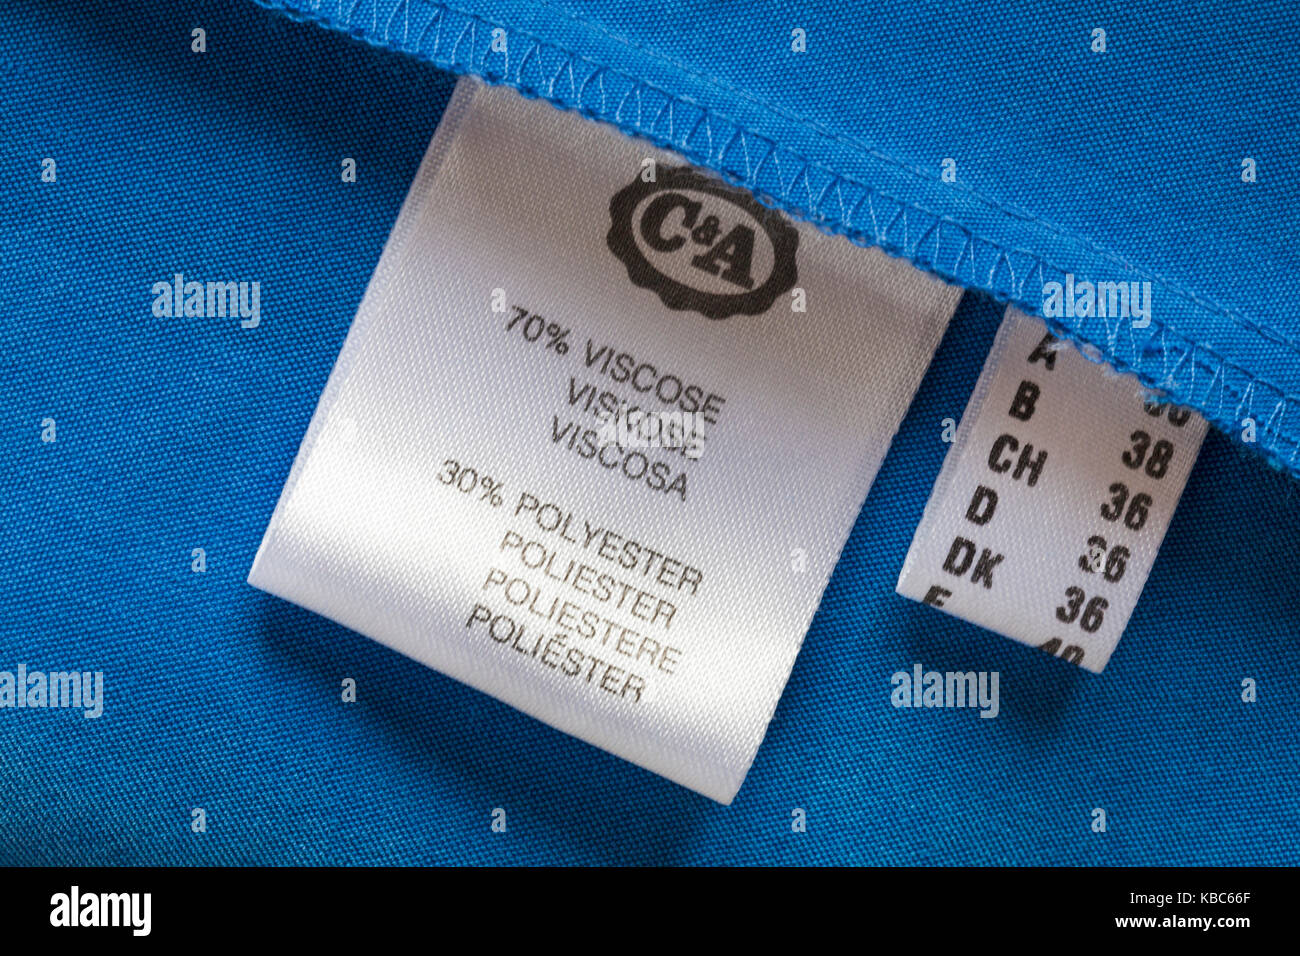 Polyester Label High Resolution Stock Photography and Images - Alamy